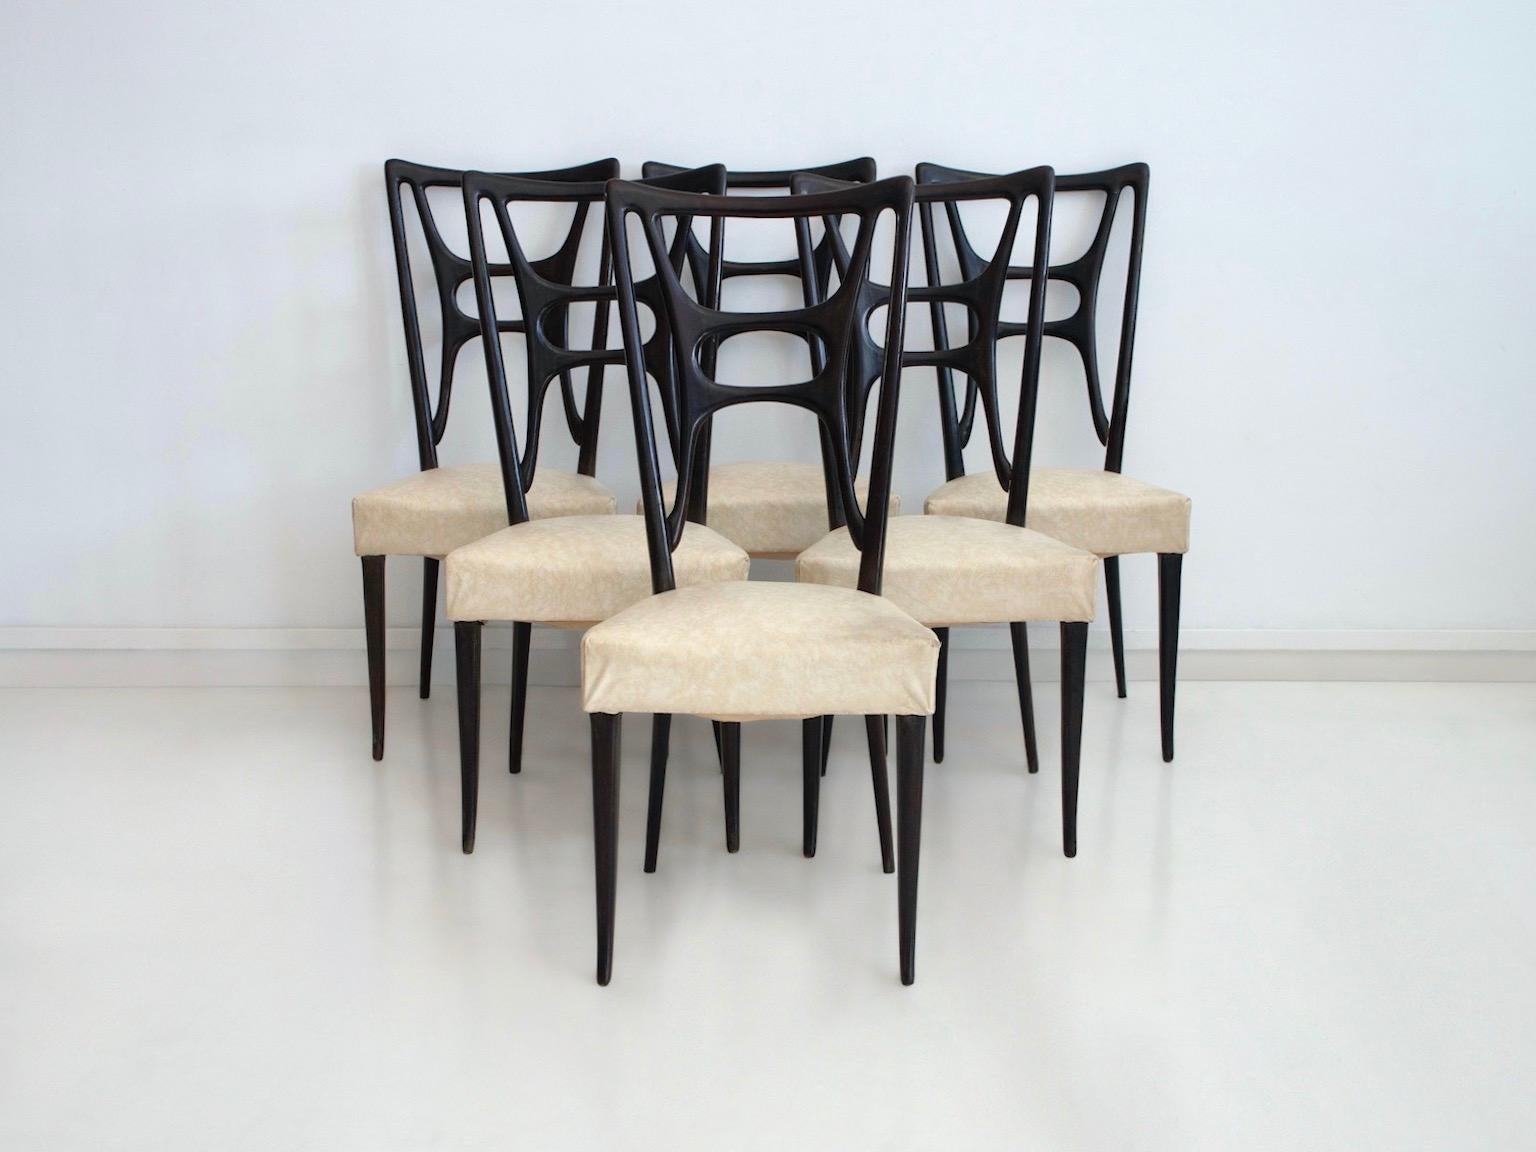 Set of six chairs made in Italy, circa 1950. Beautiful ebonized wood back and structure, upholstered seats covered in imitation leather. Some discoloration and stains on upholstery, broken corners.